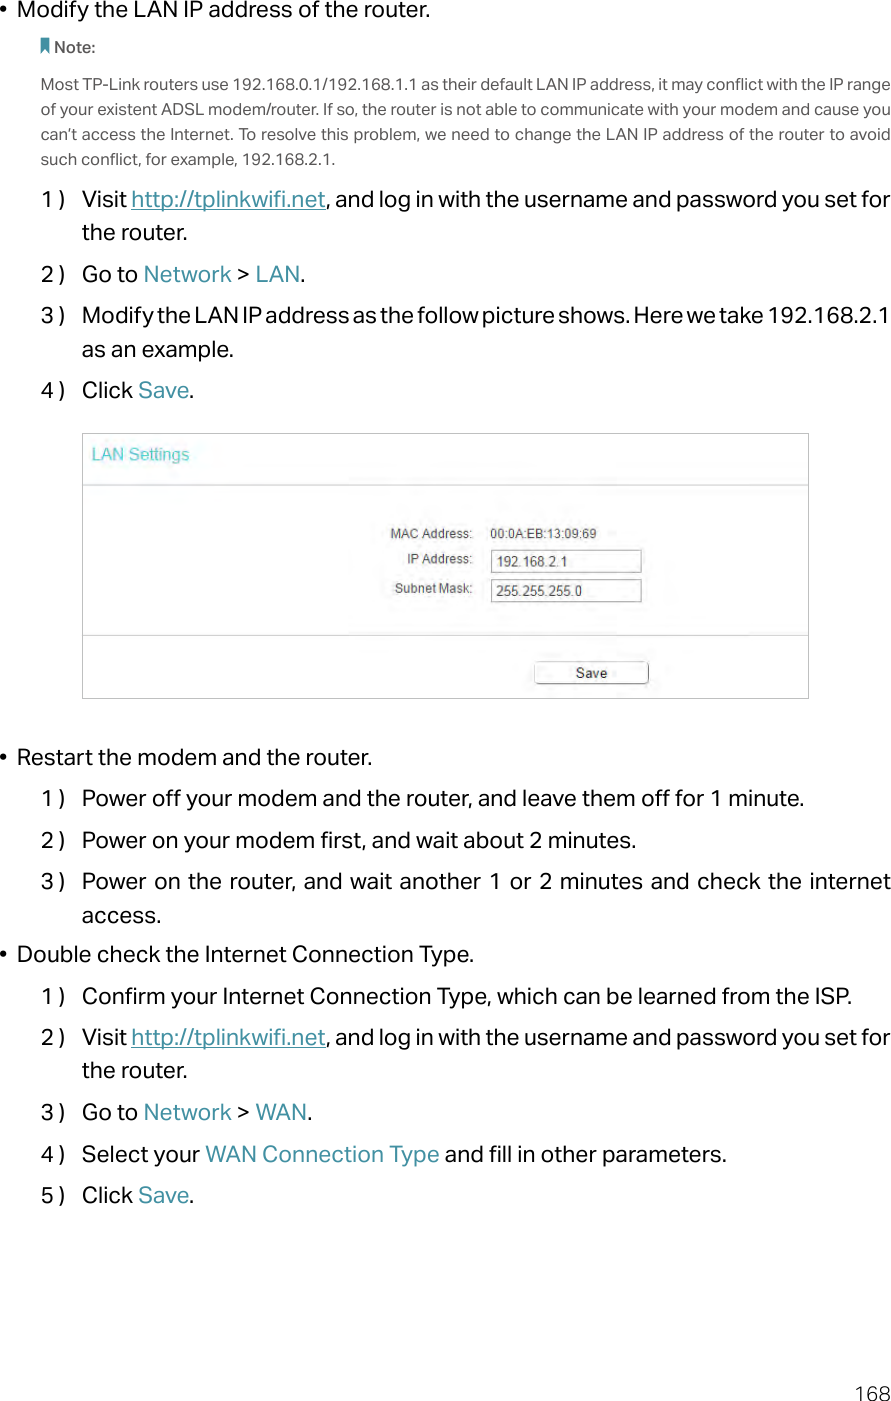 168•  Modify the LAN IP address of the router.Note: Most TP-Link routers use 192.168.0.1/192.168.1.1 as their default LAN IP address, it may conflict with the IP range of your existent ADSL modem/router. If so, the router is not able to communicate with your modem and cause you can’t access the Internet. To resolve this problem, we need to change the LAN IP address of the router to avoid such conflict, for example, 192.168.2.1. 1 )  Visit http://tplinkwifi.net, and log in with the username and password you set for the router.2 )  Go to Network &gt; LAN.3 )  Modify the LAN IP address as the follow picture shows. Here we take 192.168.2.1 as an example.4 )  Click Save.•  Restart the modem and the router.1 )  Power off your modem and the router, and leave them off for 1 minute.2 )  Power on your modem first, and wait about 2 minutes.3 )  Power on the router, and wait another 1 or 2 minutes and check the internet access.•  Double check the Internet Connection Type.1 )  Confirm your Internet Connection Type, which can be learned from the ISP.2 )  Visit http://tplinkwifi.net, and log in with the username and password you set for the router.3 )  Go to Network &gt; WAN.4 )  Select your WAN Connection Type and fill in other parameters.5 )  Click Save.